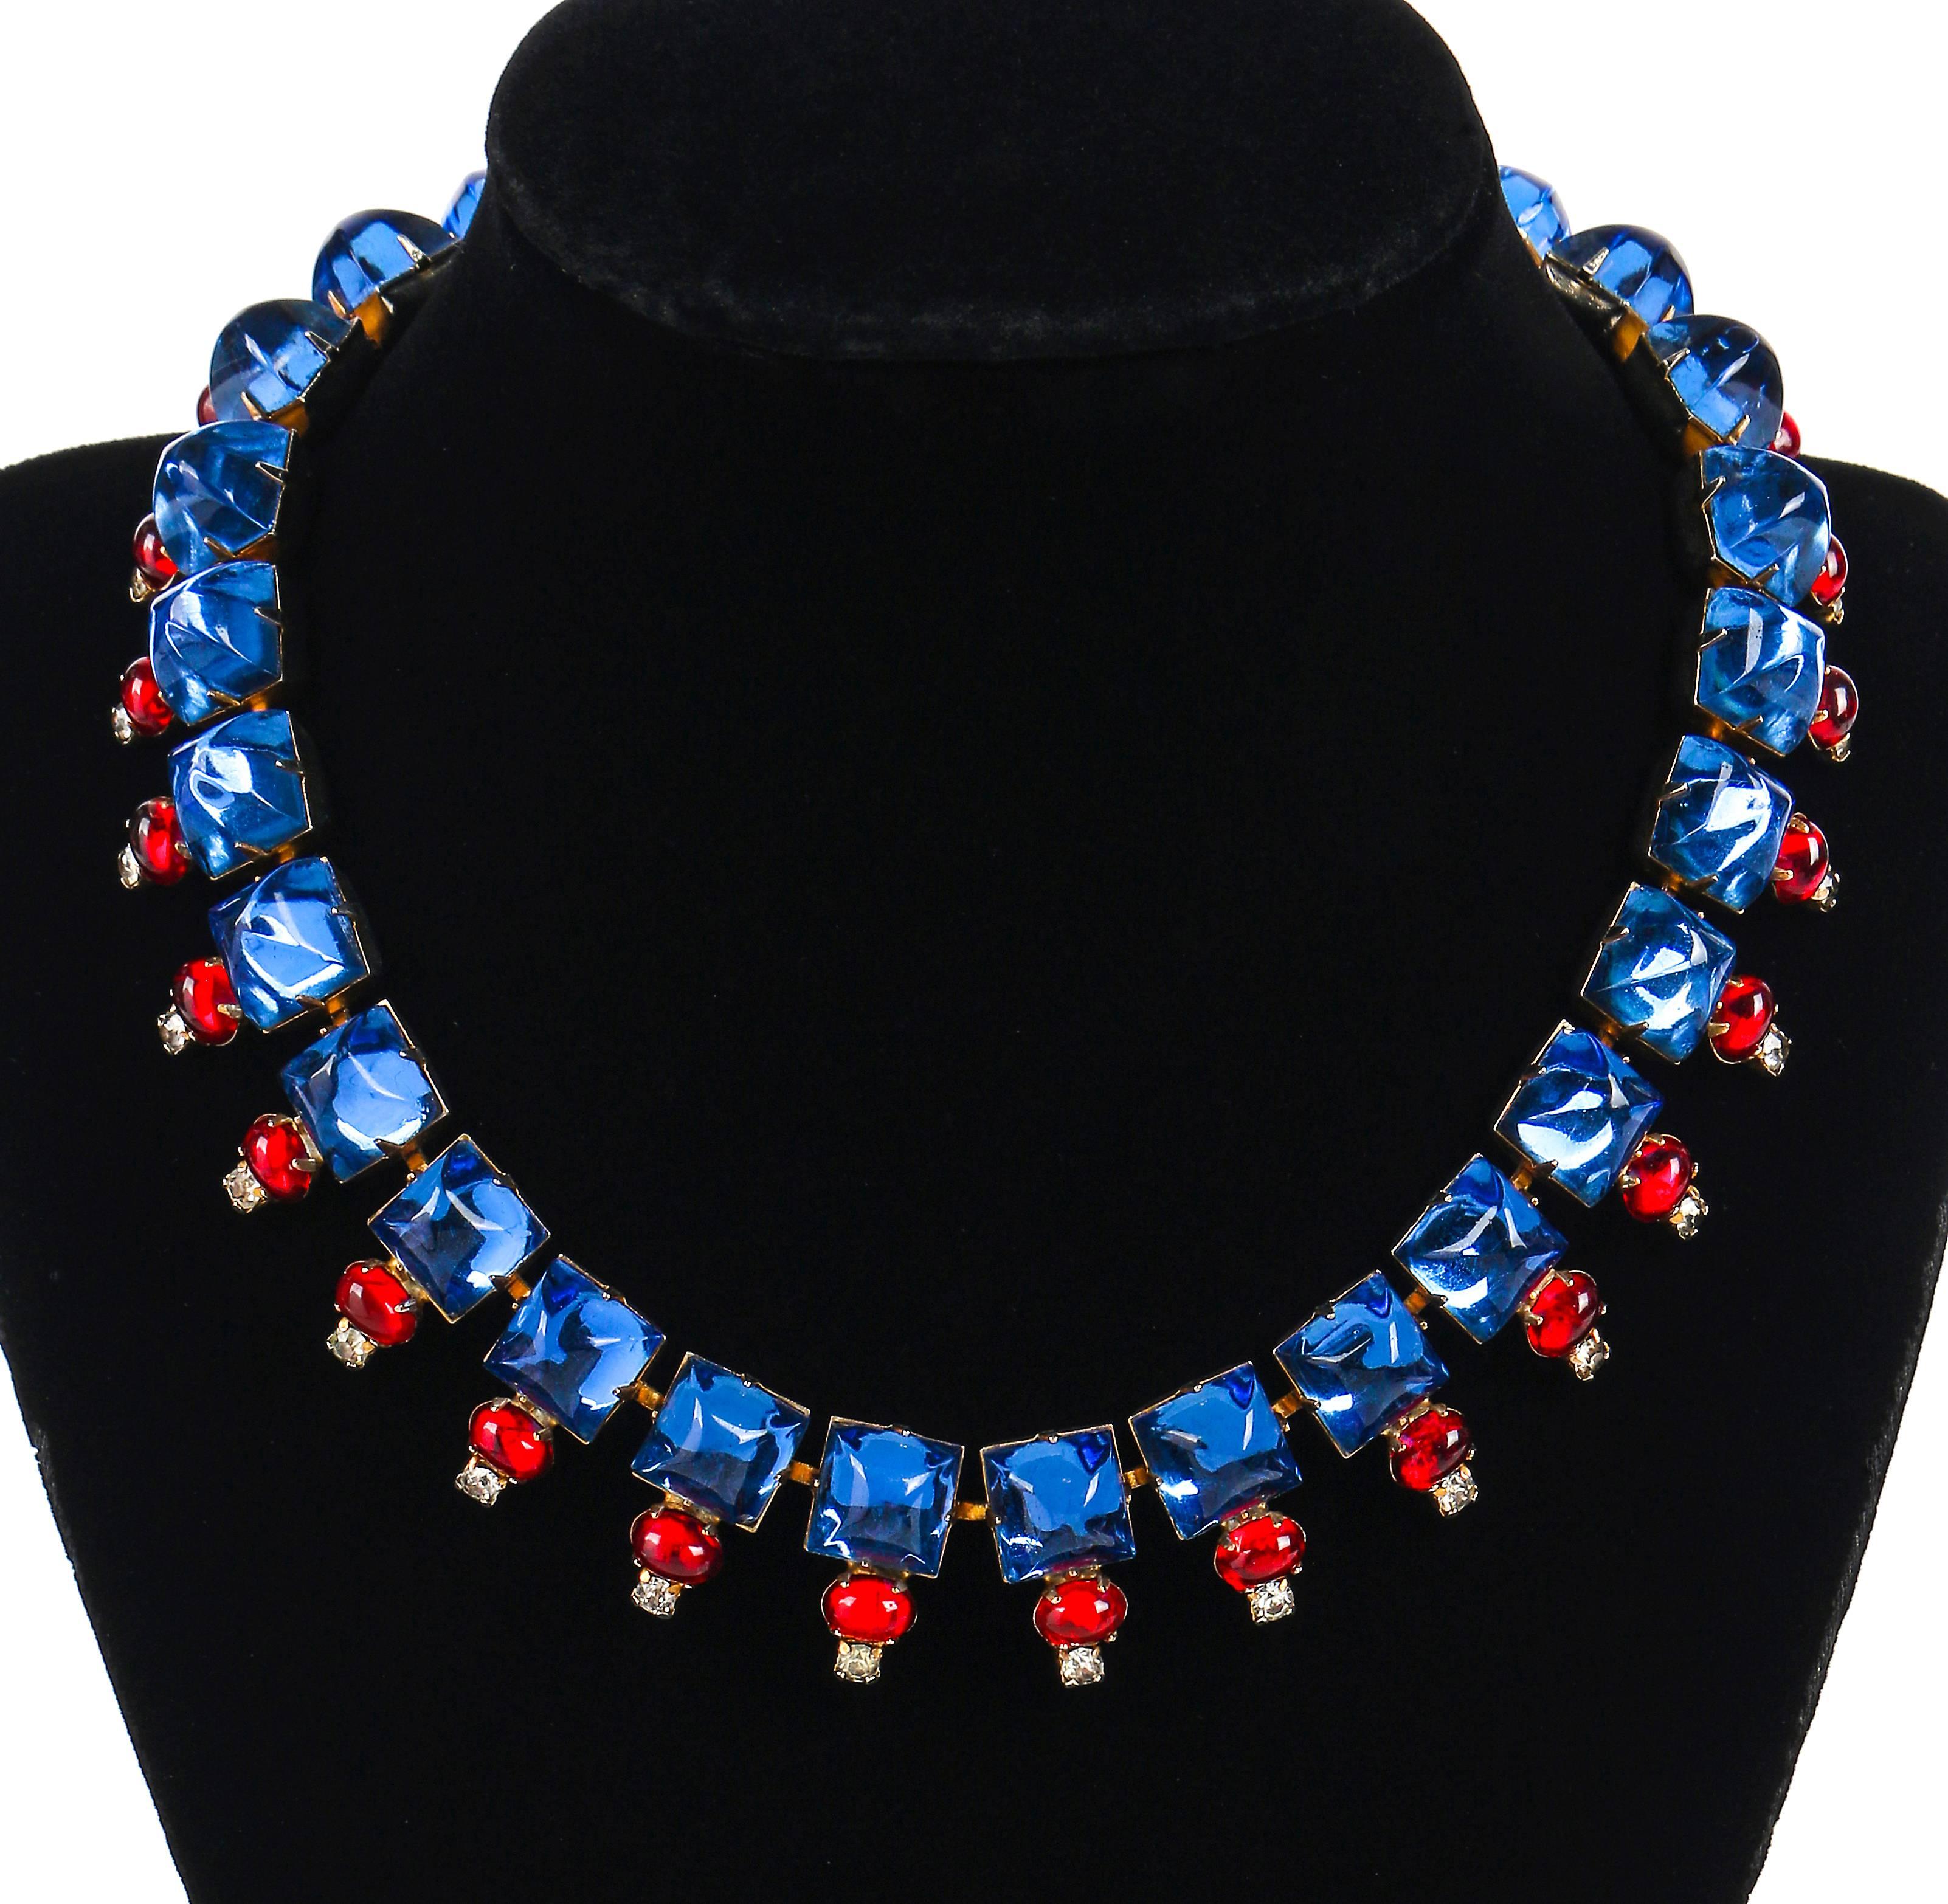 Vintage c.1960's Hattie Carnegie silver/gold tone setting with sapphire blue, ruby red, clear crystal cabochon glass rhinestone necklace. Large square domed prong set sapphire colored glass stones (measure approximately 10mm) are connected by a fine